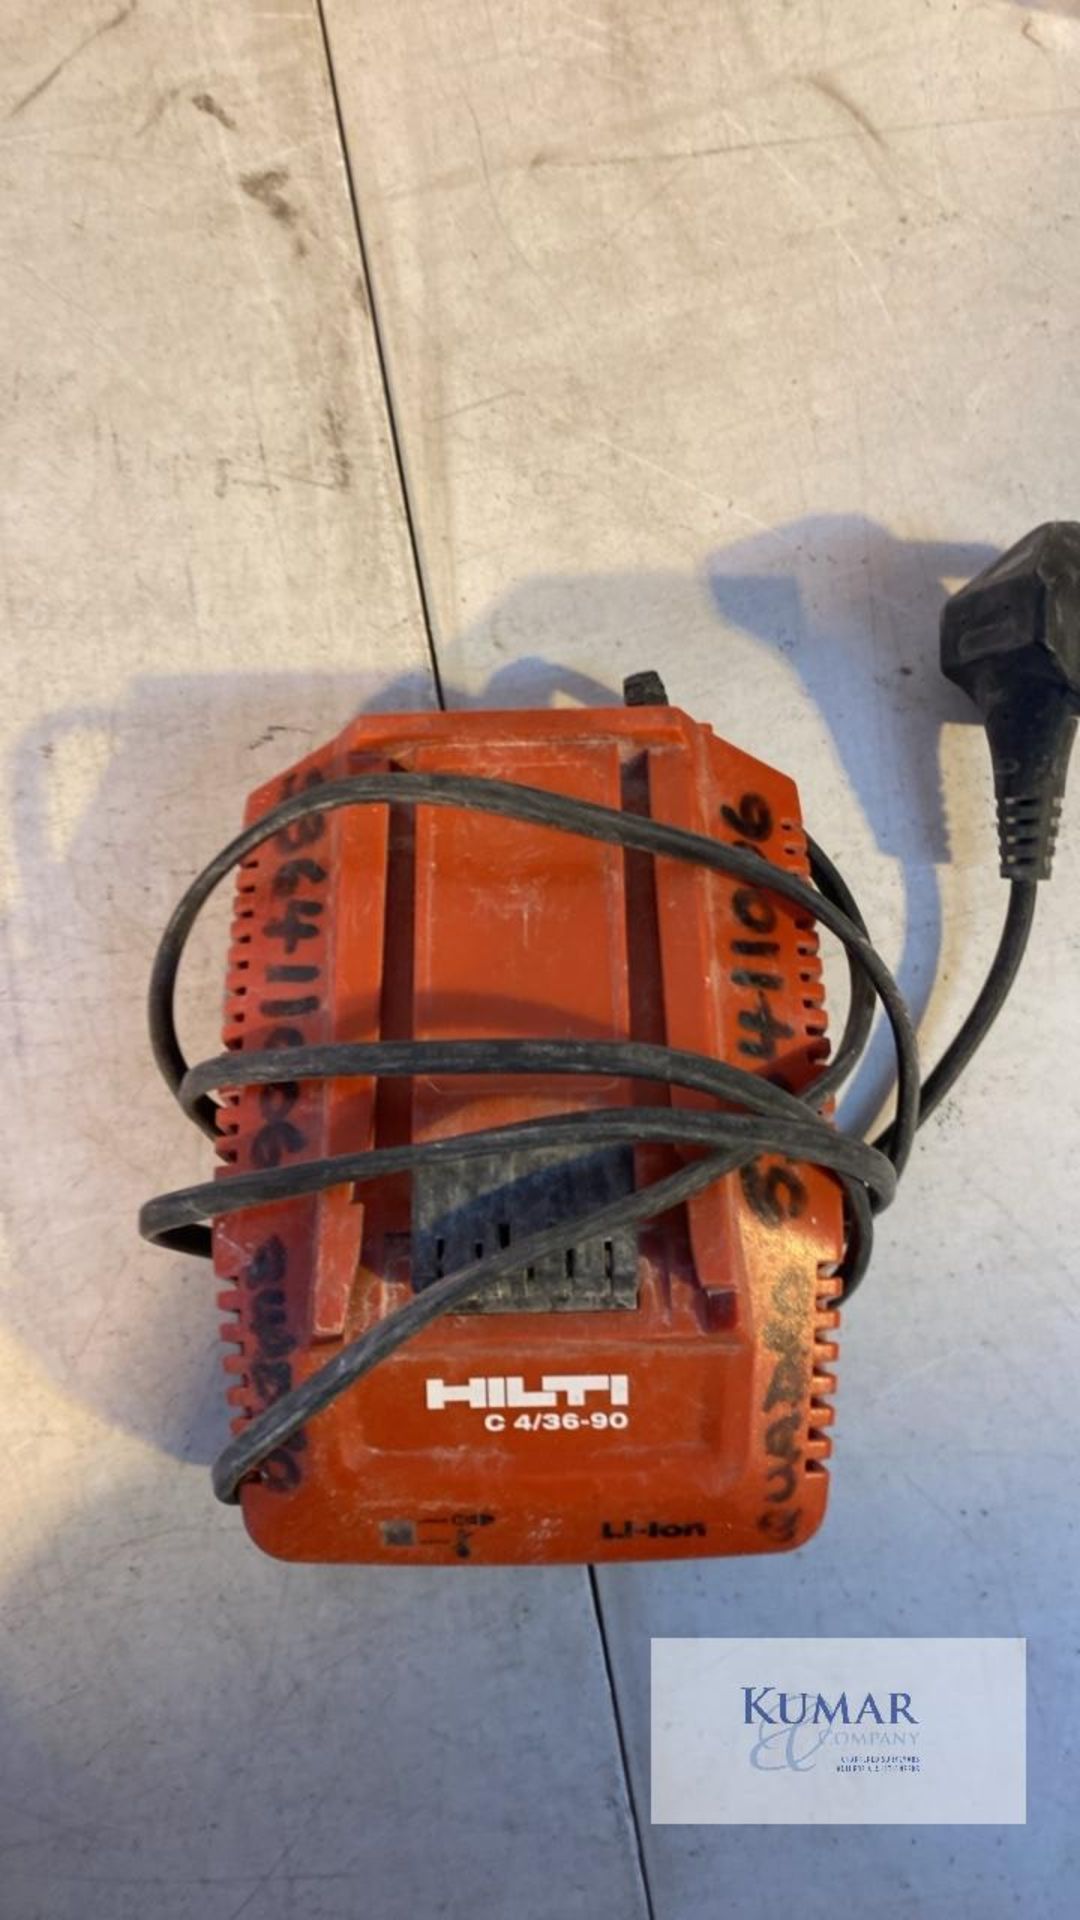 2: Hilti C4/36-90 Battery Chargers, Serial No.831310628 & Serial No.N/A & 1: Hilti C4/36-90 110 Volt - Image 6 of 8